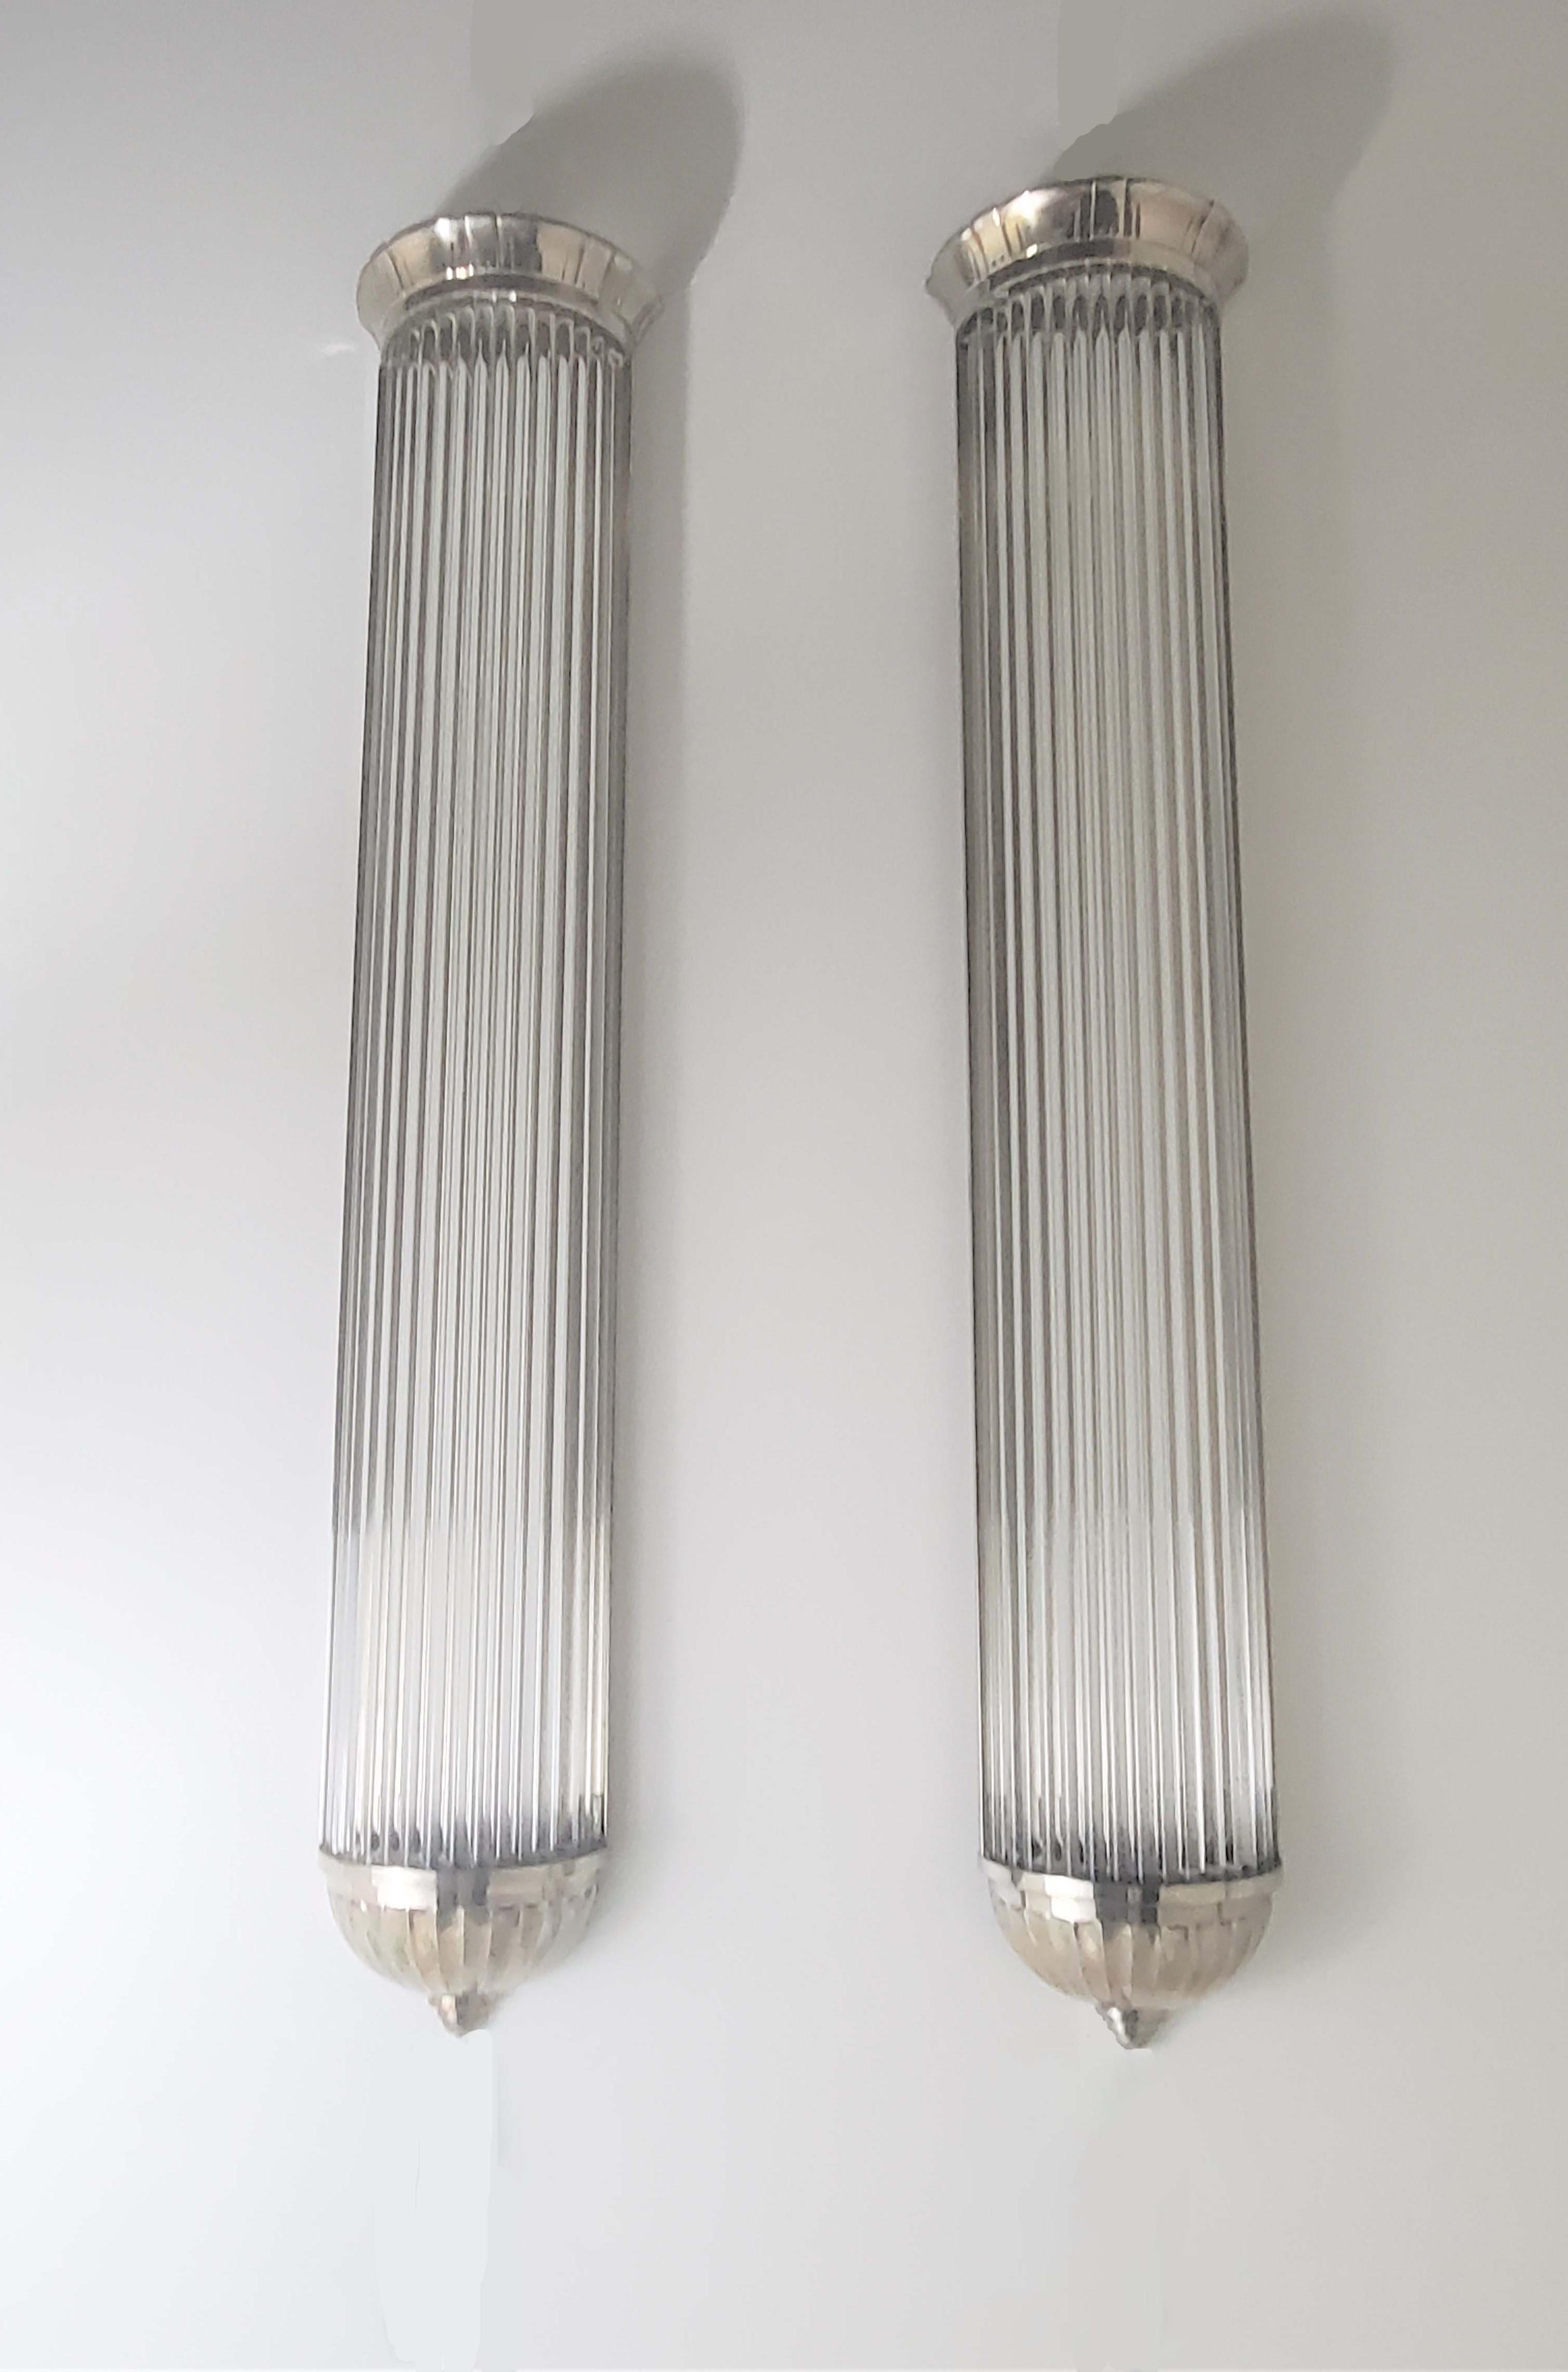 Monumental Pair of French Modernist Long Tubular Sconces by Petitot For Sale 6